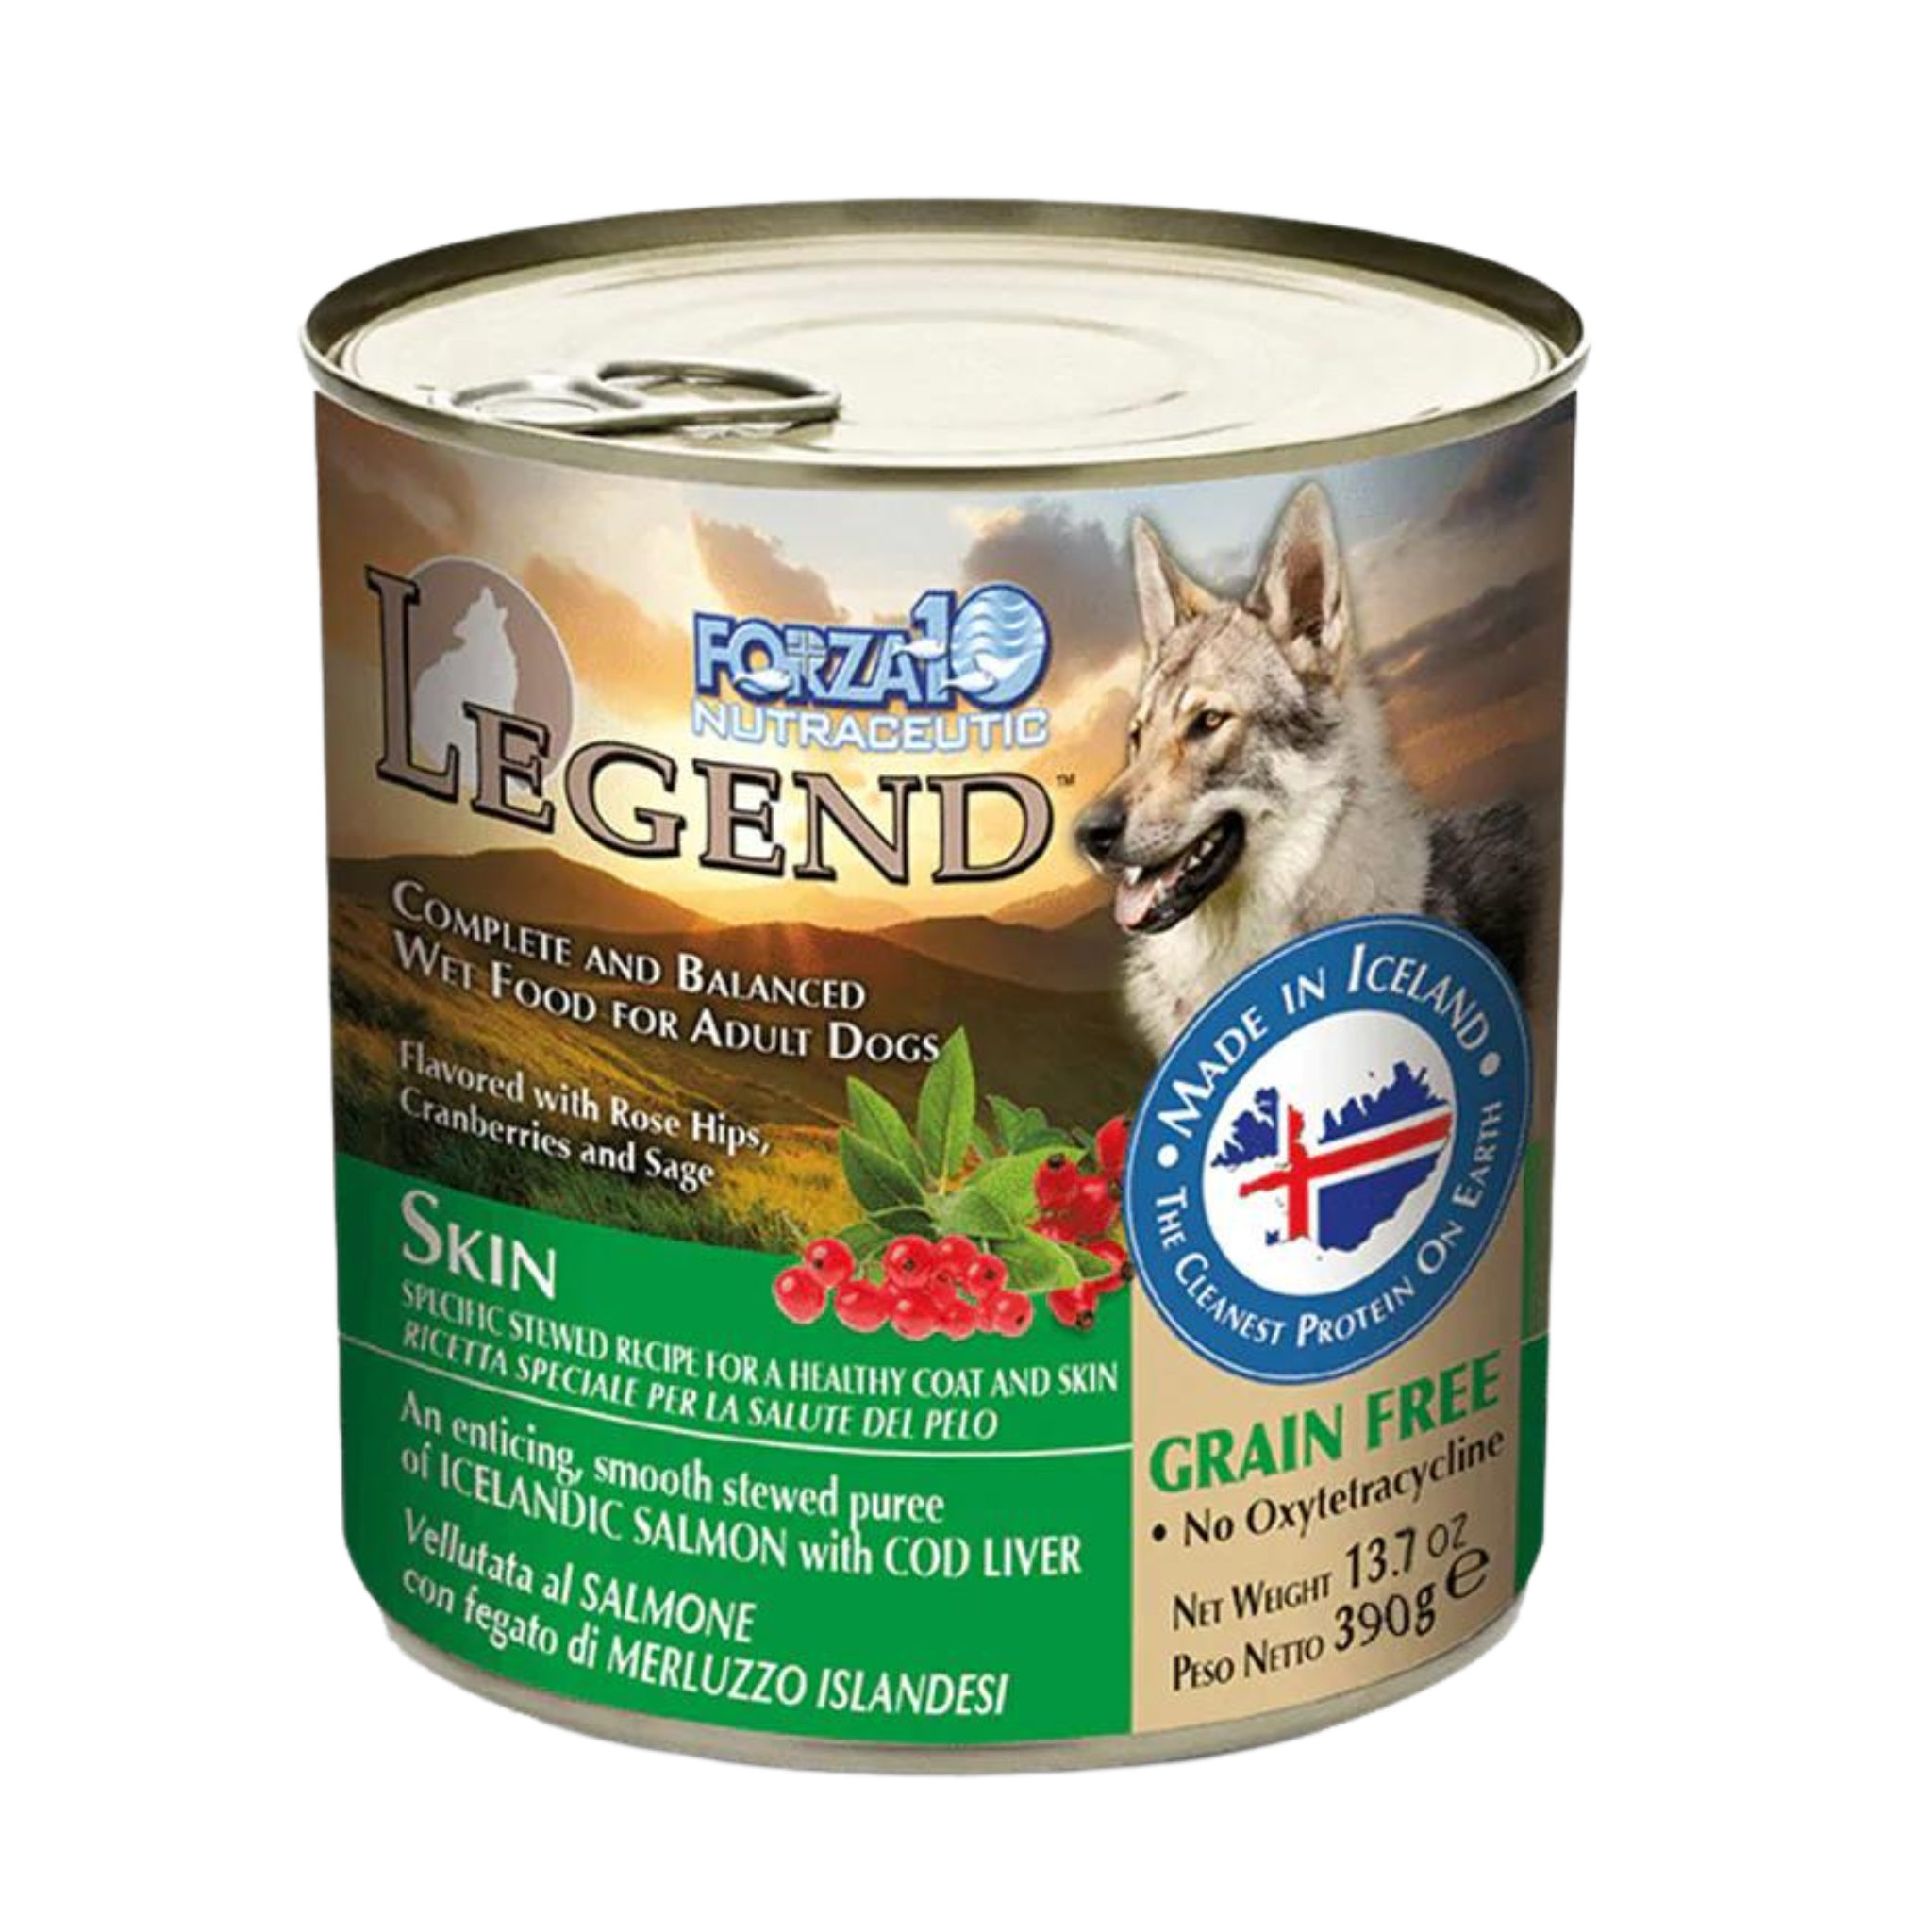 Forza10 Nutraceutic Legend Skin Icelandic Fish Recipe Grain-Free Canned Dog Food 13.7-oz can - Mutts & Co.